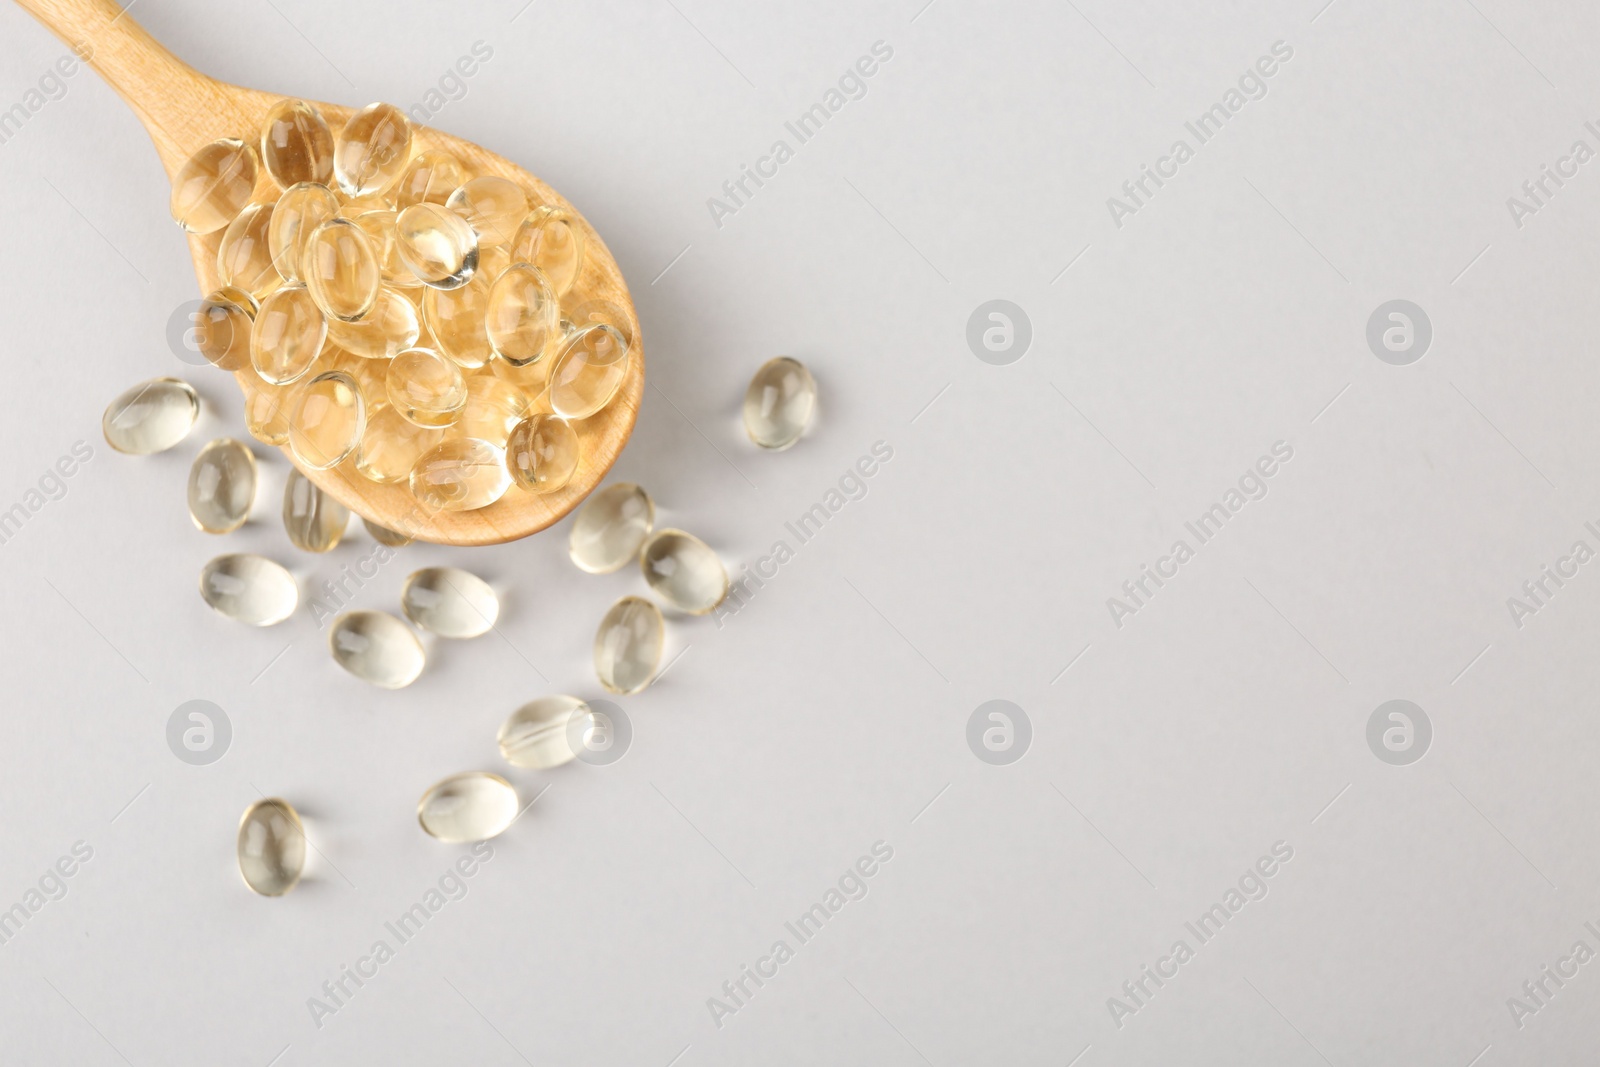 Photo of Wooden spoon with vitamin capsules on light background, top view. Space for text